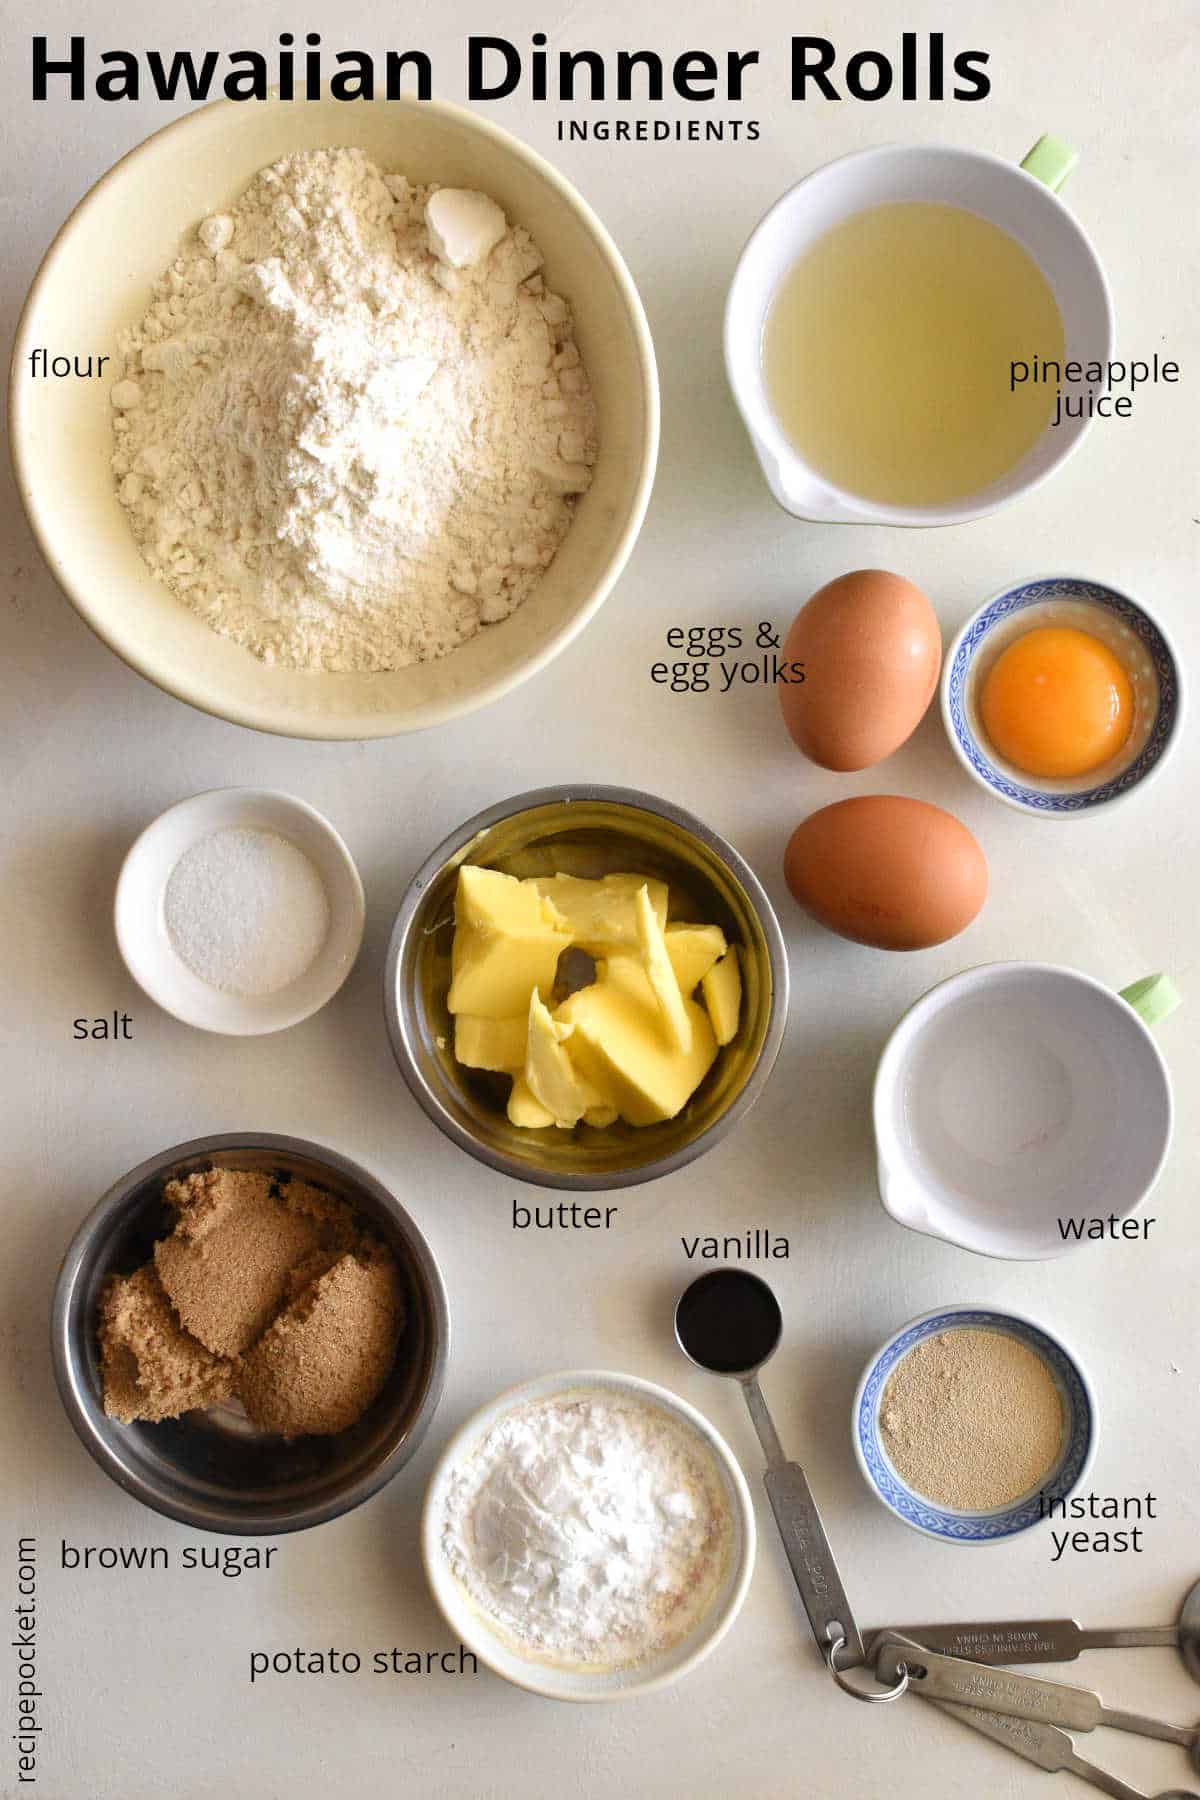 Picture showing ingredients needed to make Hawaiian rolls.